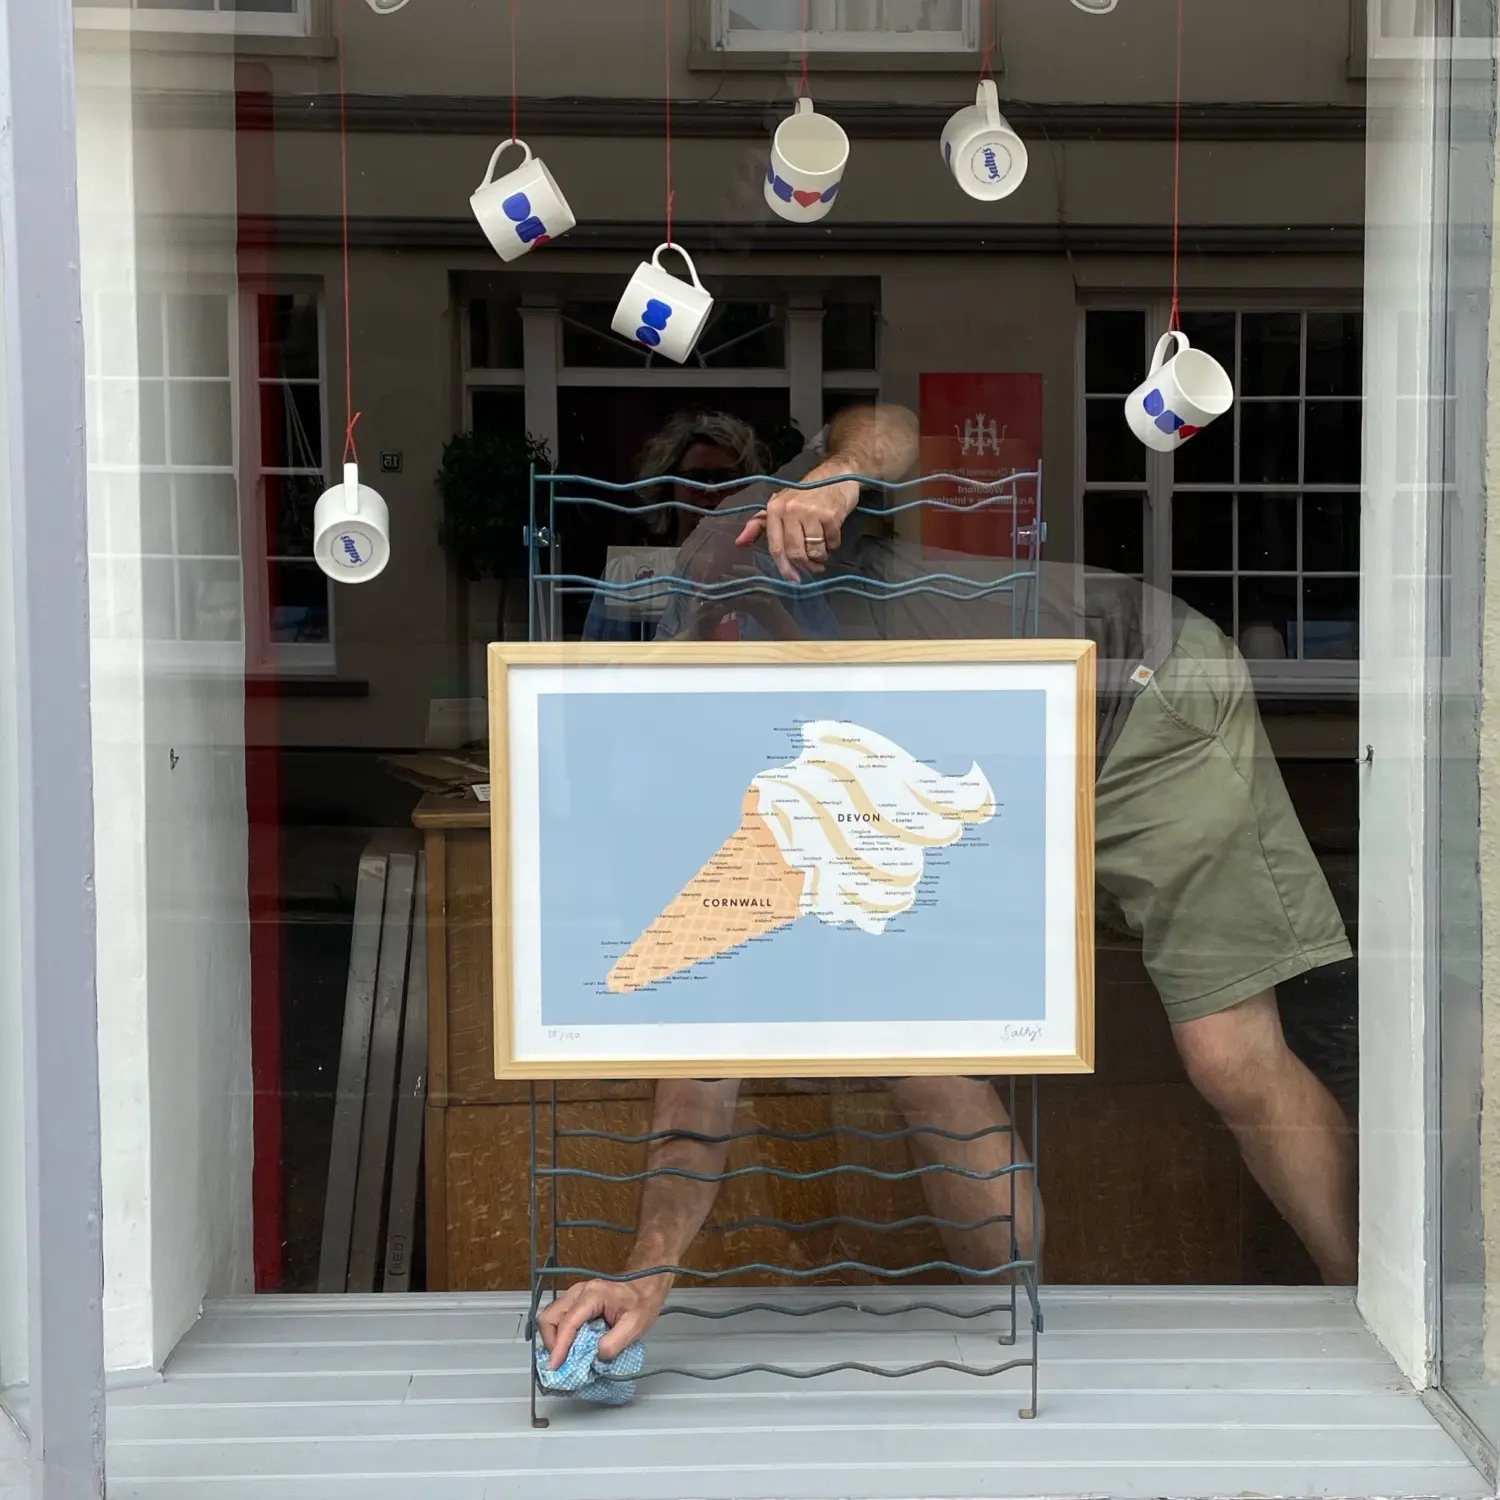 A man dusts a shop window, obscured by a wire frame holding up a picture of Devon and Cornwall in the shape of an icecream. China mugs are suspended above him, each with a design on saying Devon. 